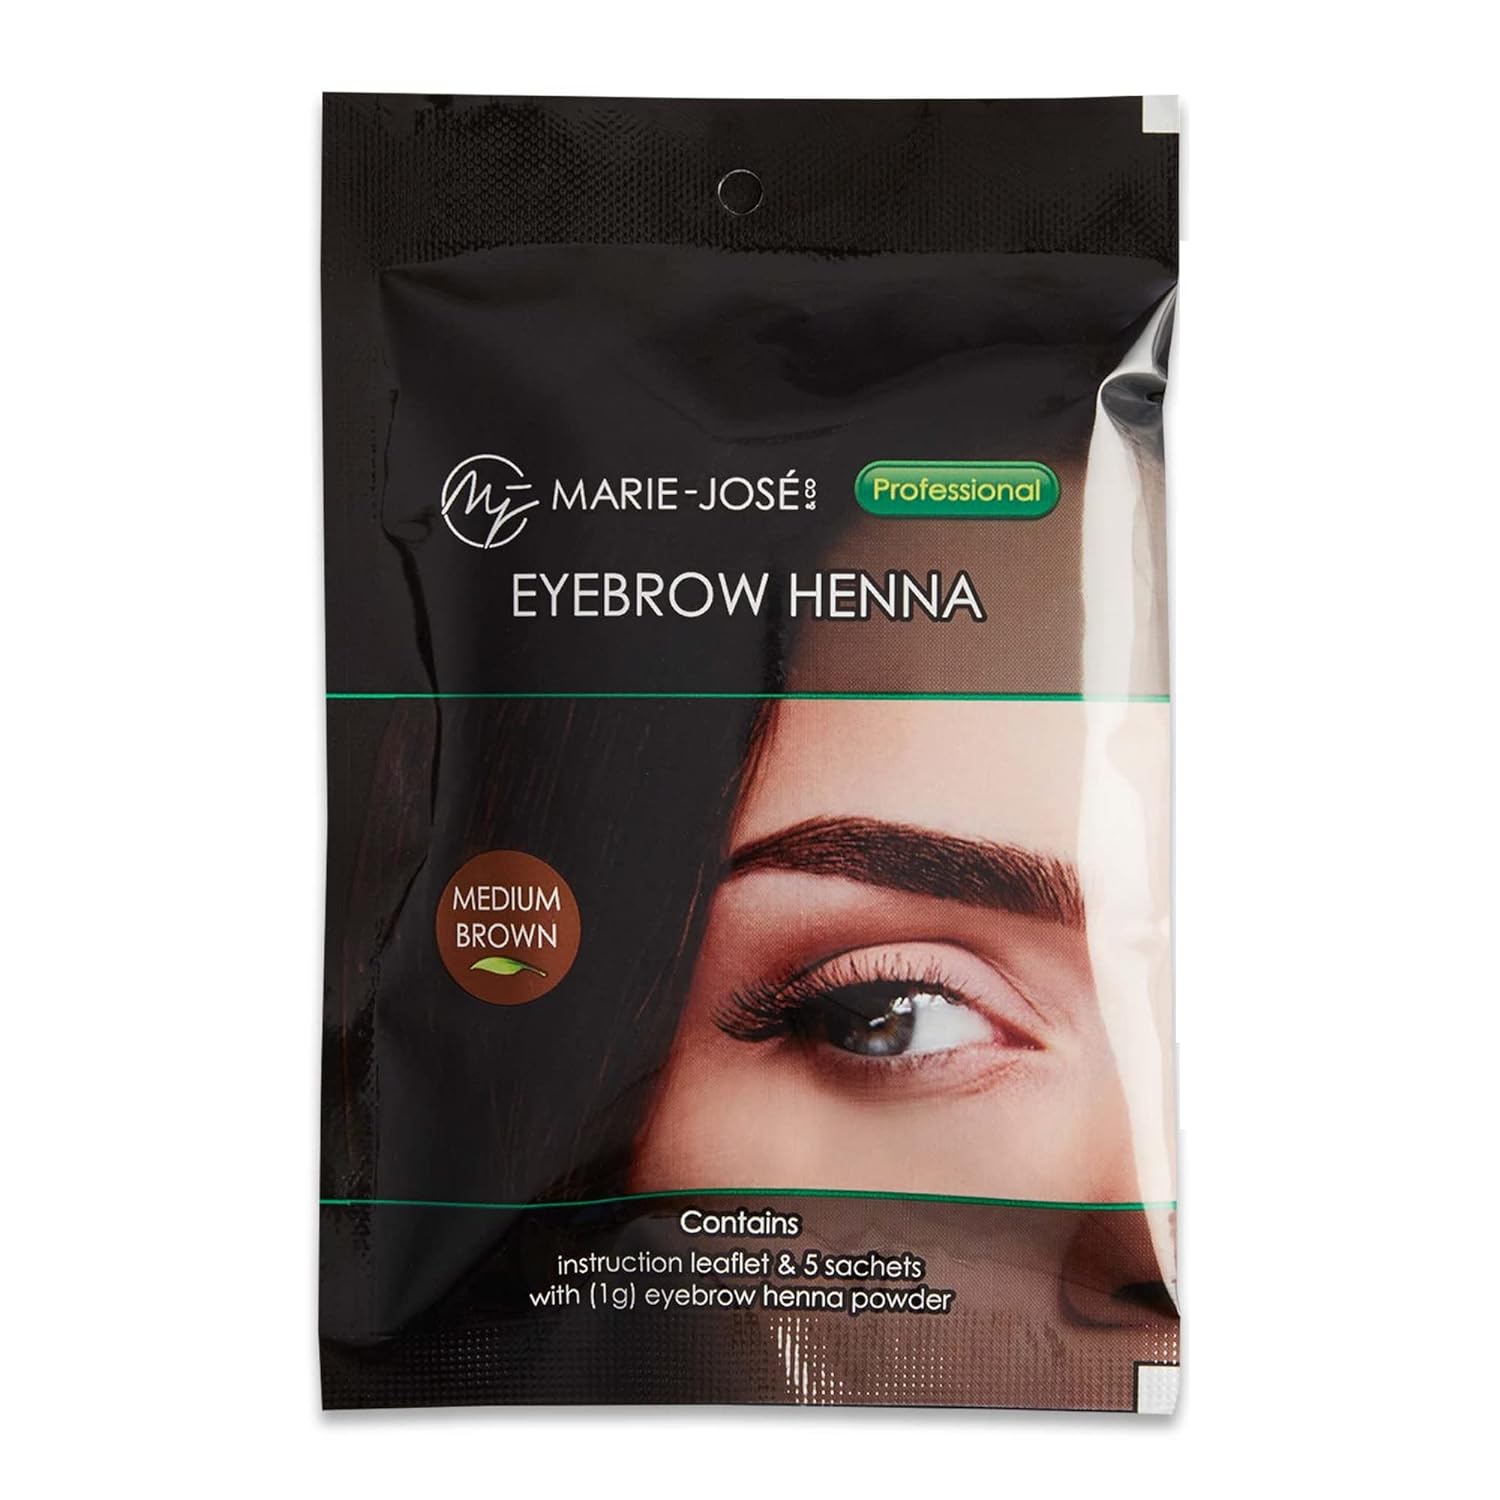 Marie-José & Co Henna Eyebrow Tint Medium Brown Dye, Eyebrow for Spot Coloring, Long-Lasting Eyebrow Powder, Water & Smudge Proof, 5 Sachets, Good for 50 Applications